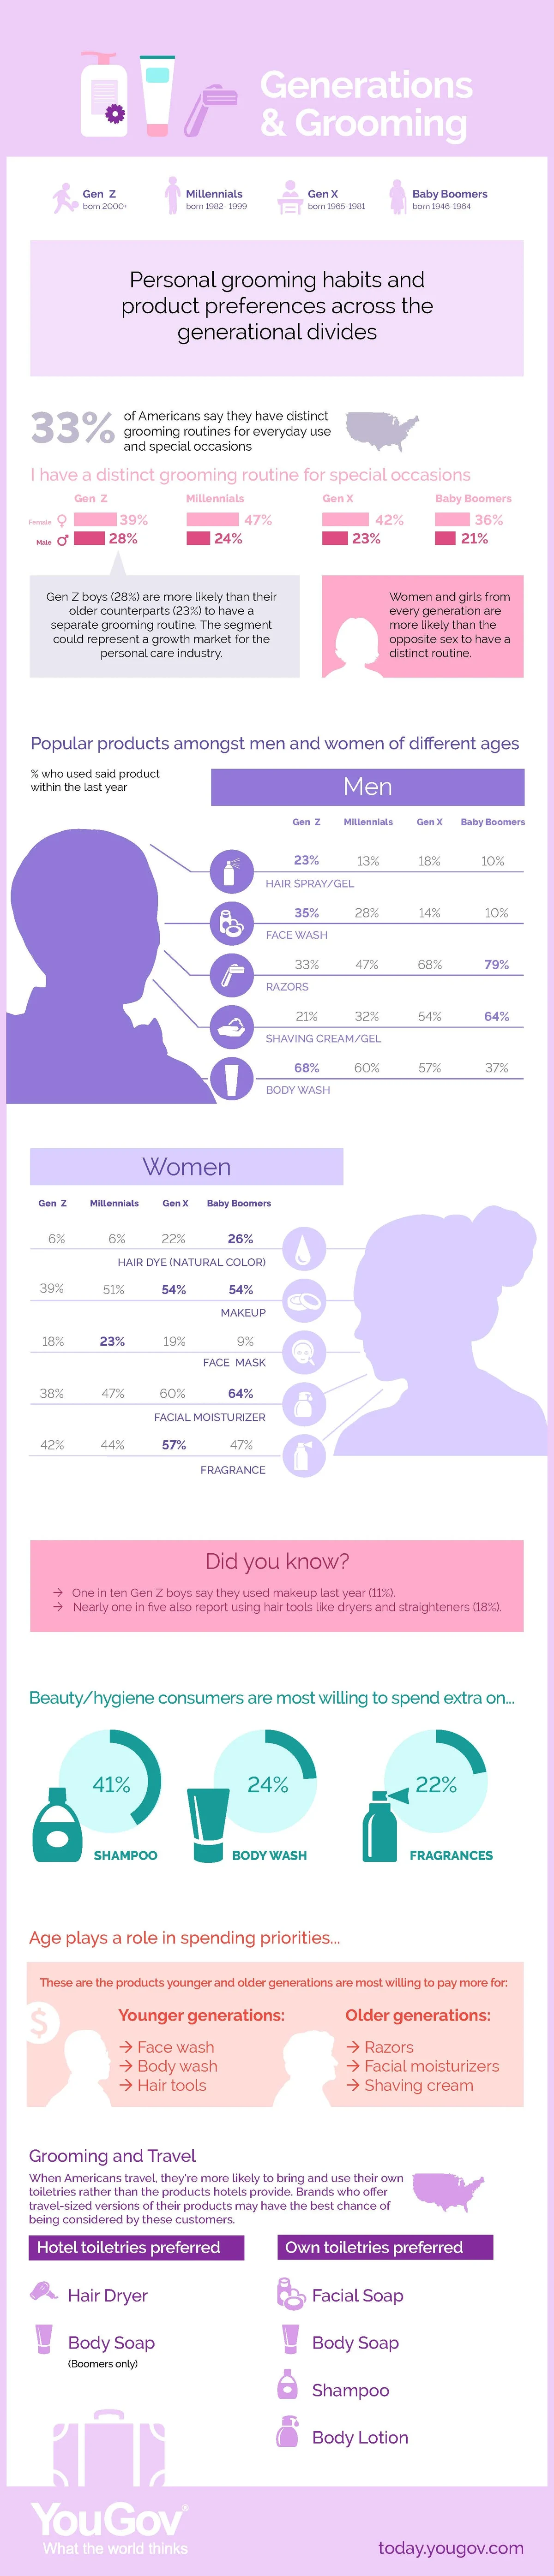 22 Facts You Should Know About Millennial Moms [Infographic]